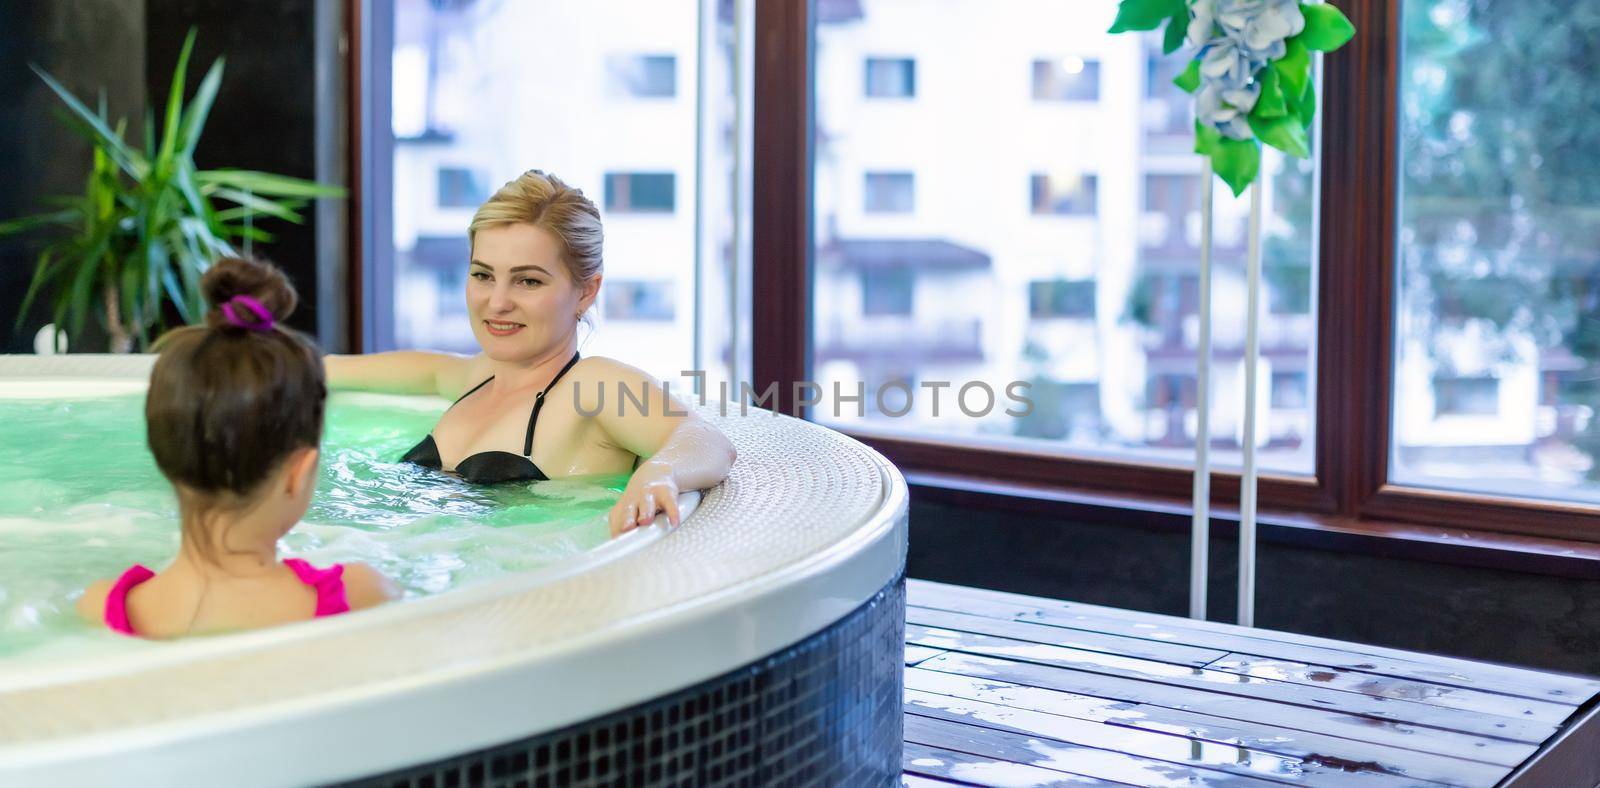 Mother and daughter relaxing in private jacuzzi. People smiling. Travel, summer and family concept.